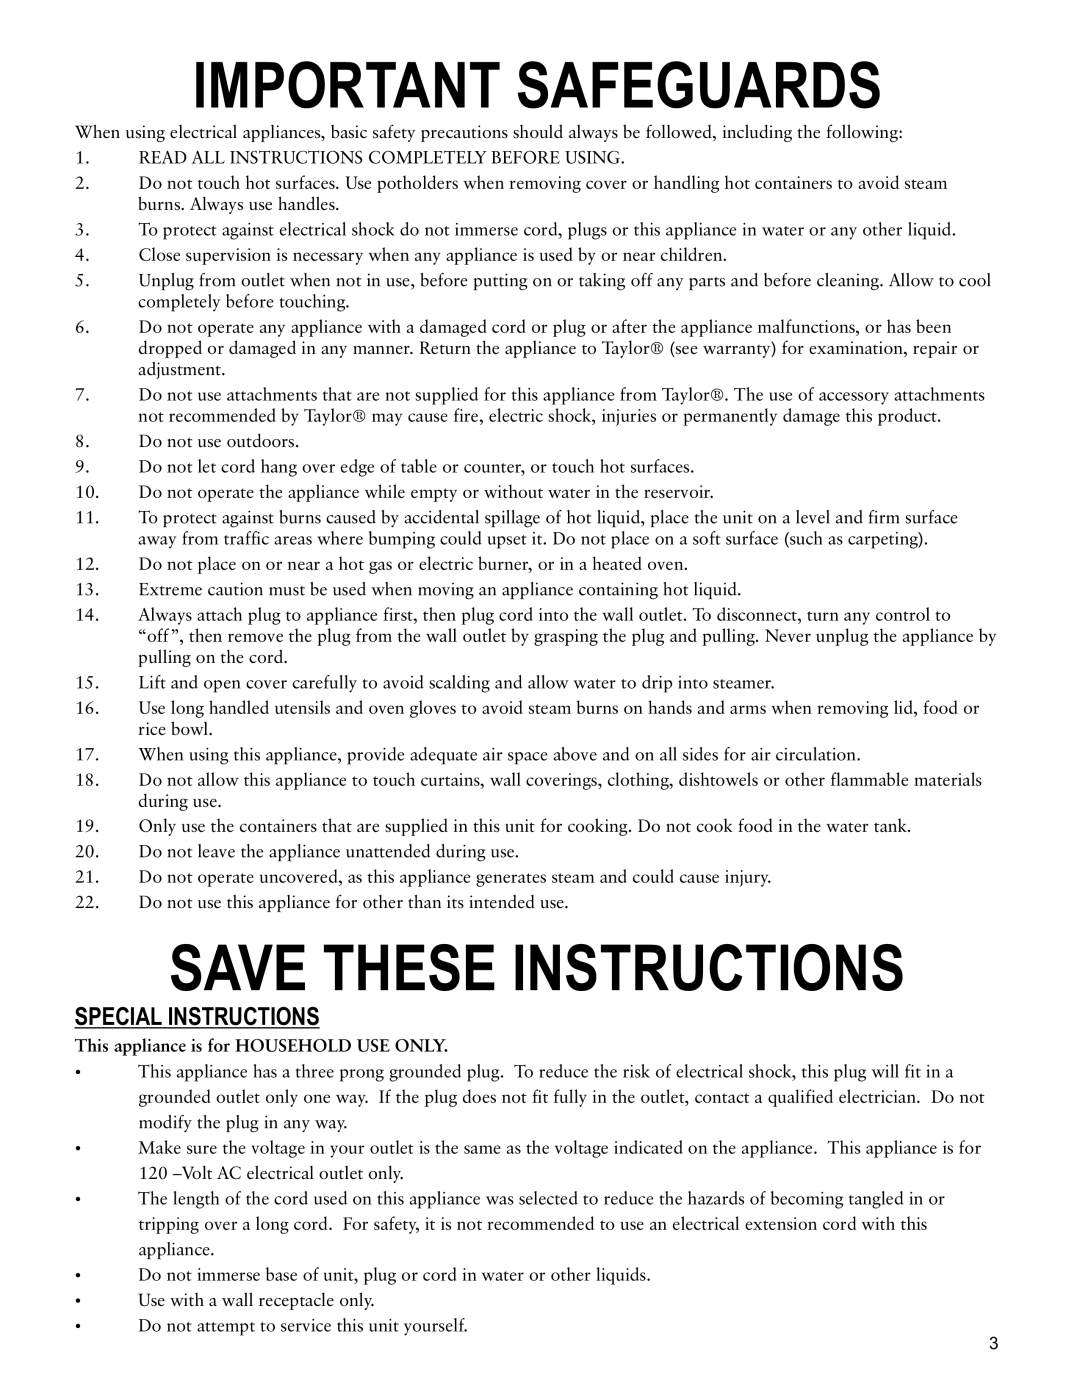 Taylor AS-1550-BL instruction manual Special Instructions, Important Safeguards, Save These Instructions 